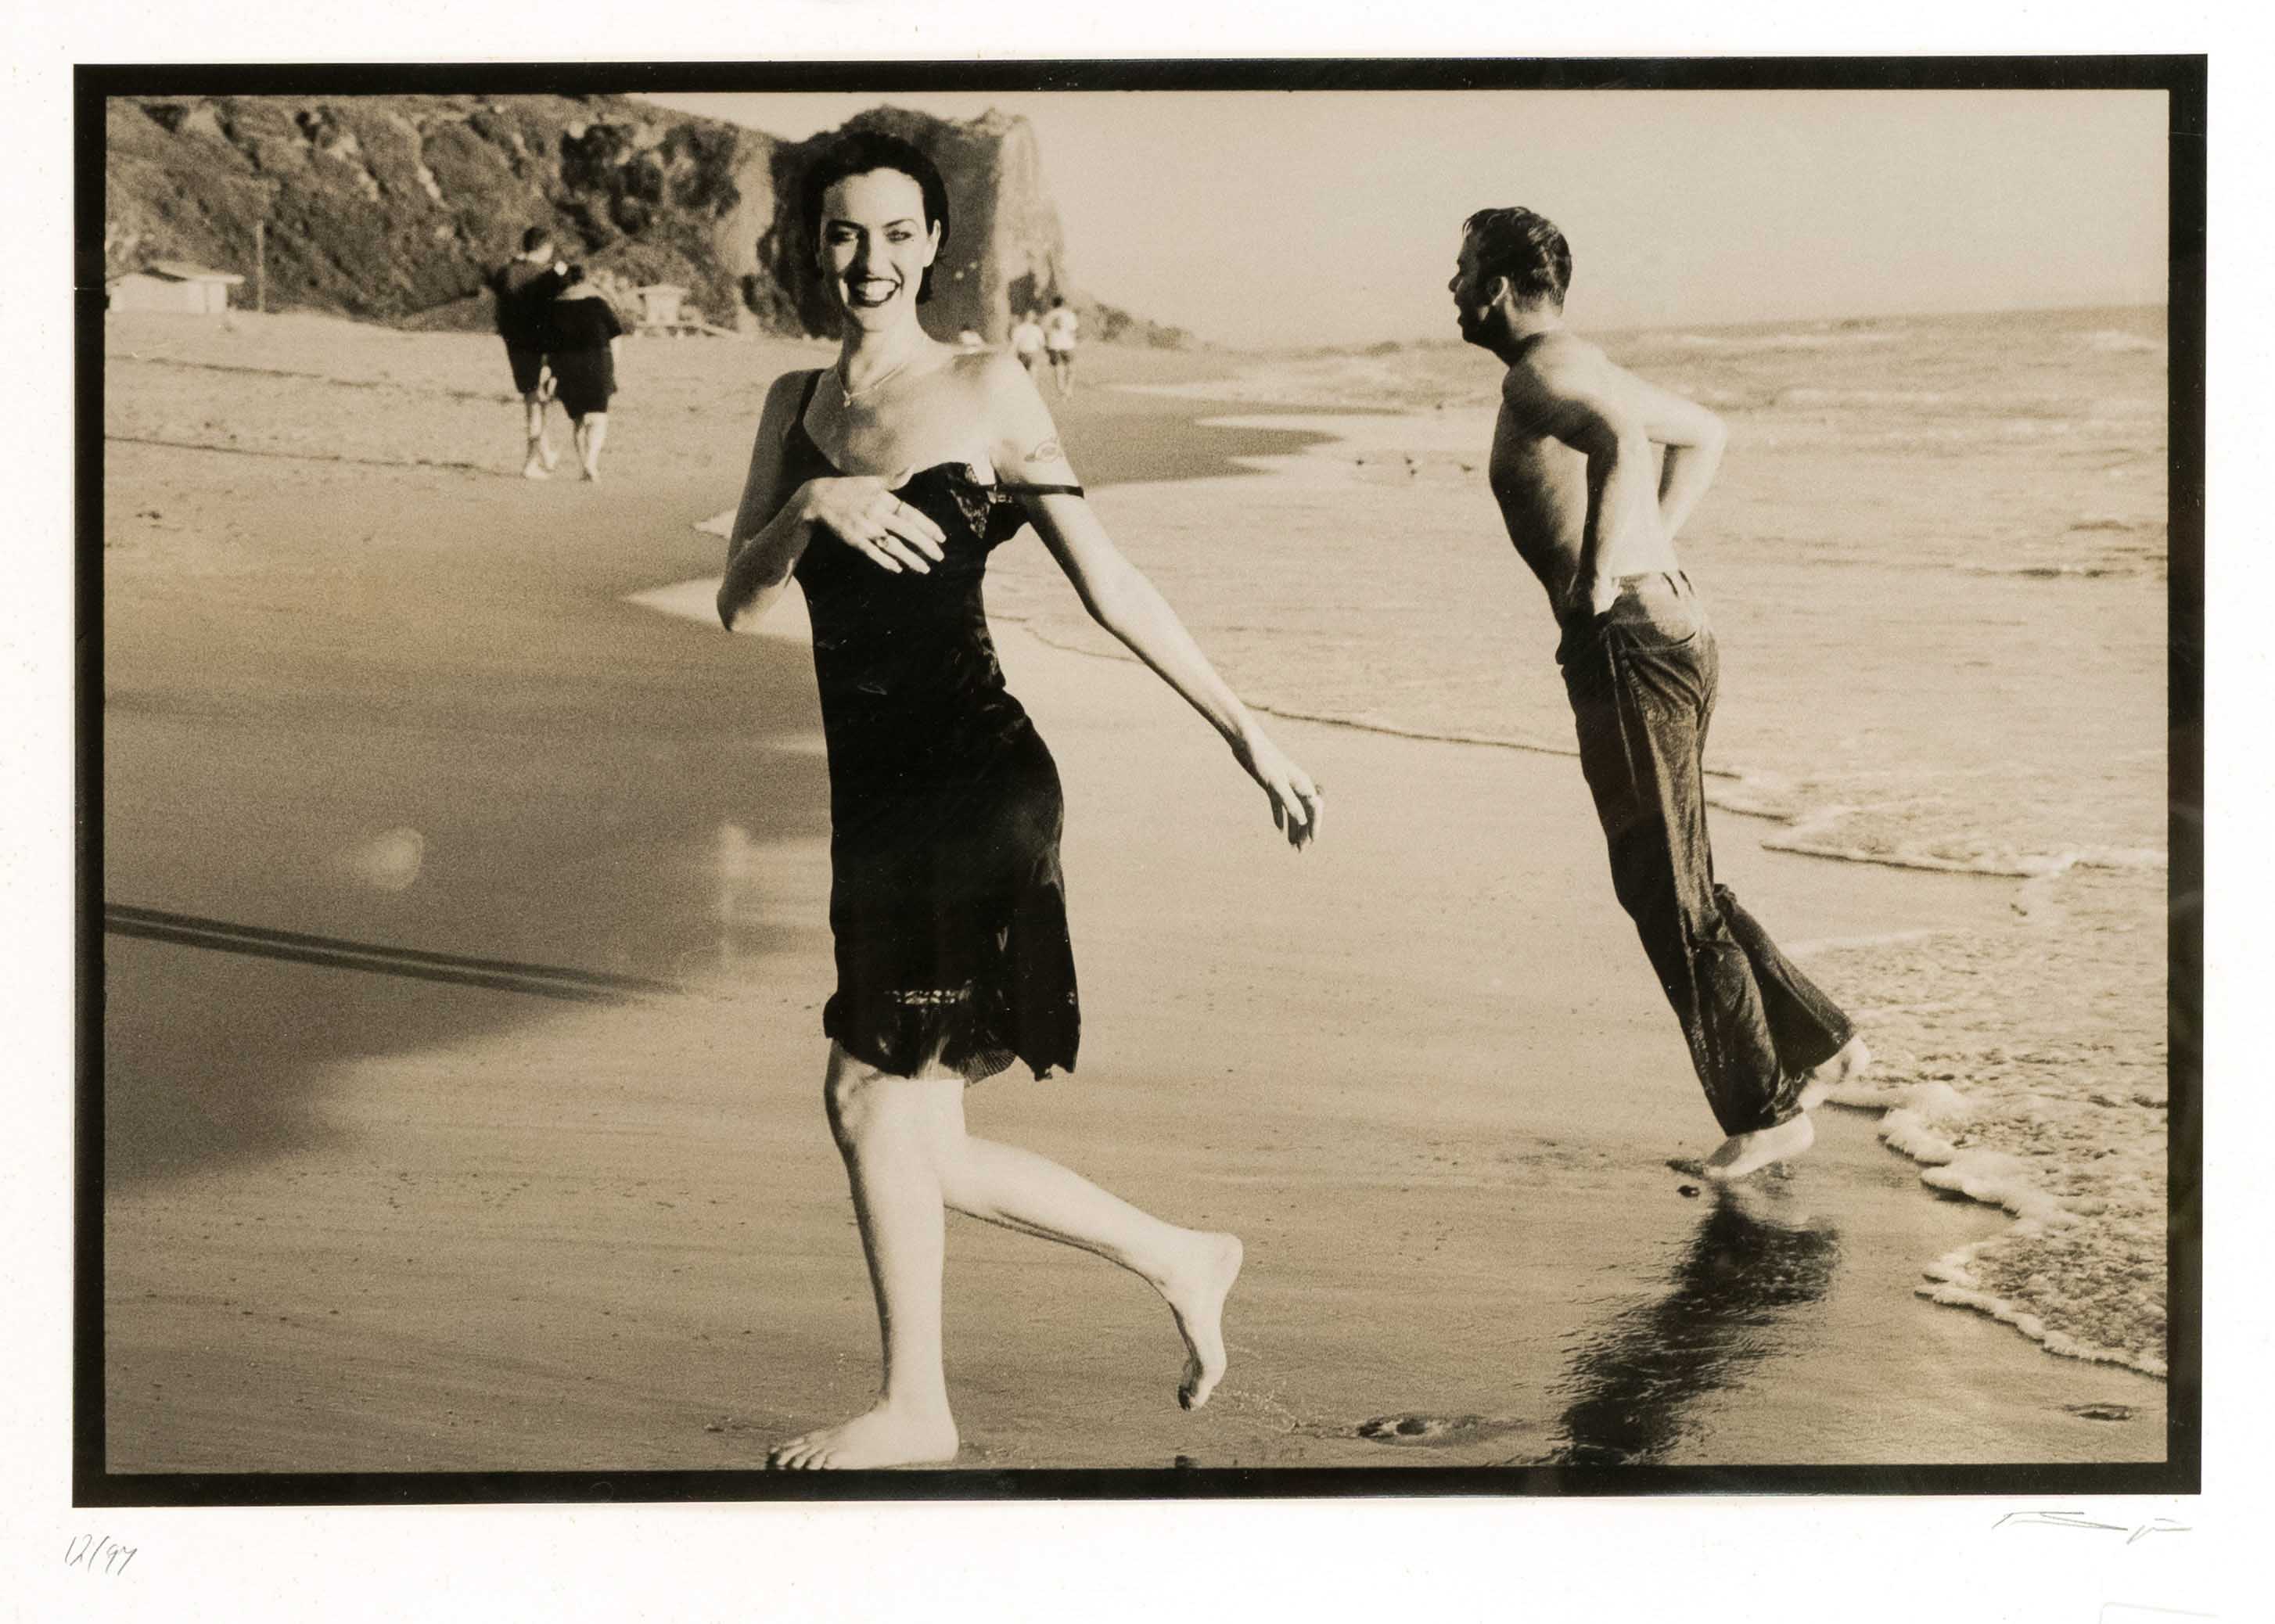 Unidentified photographer, 2nd half of 20th century, beach scene, large black and white print, on